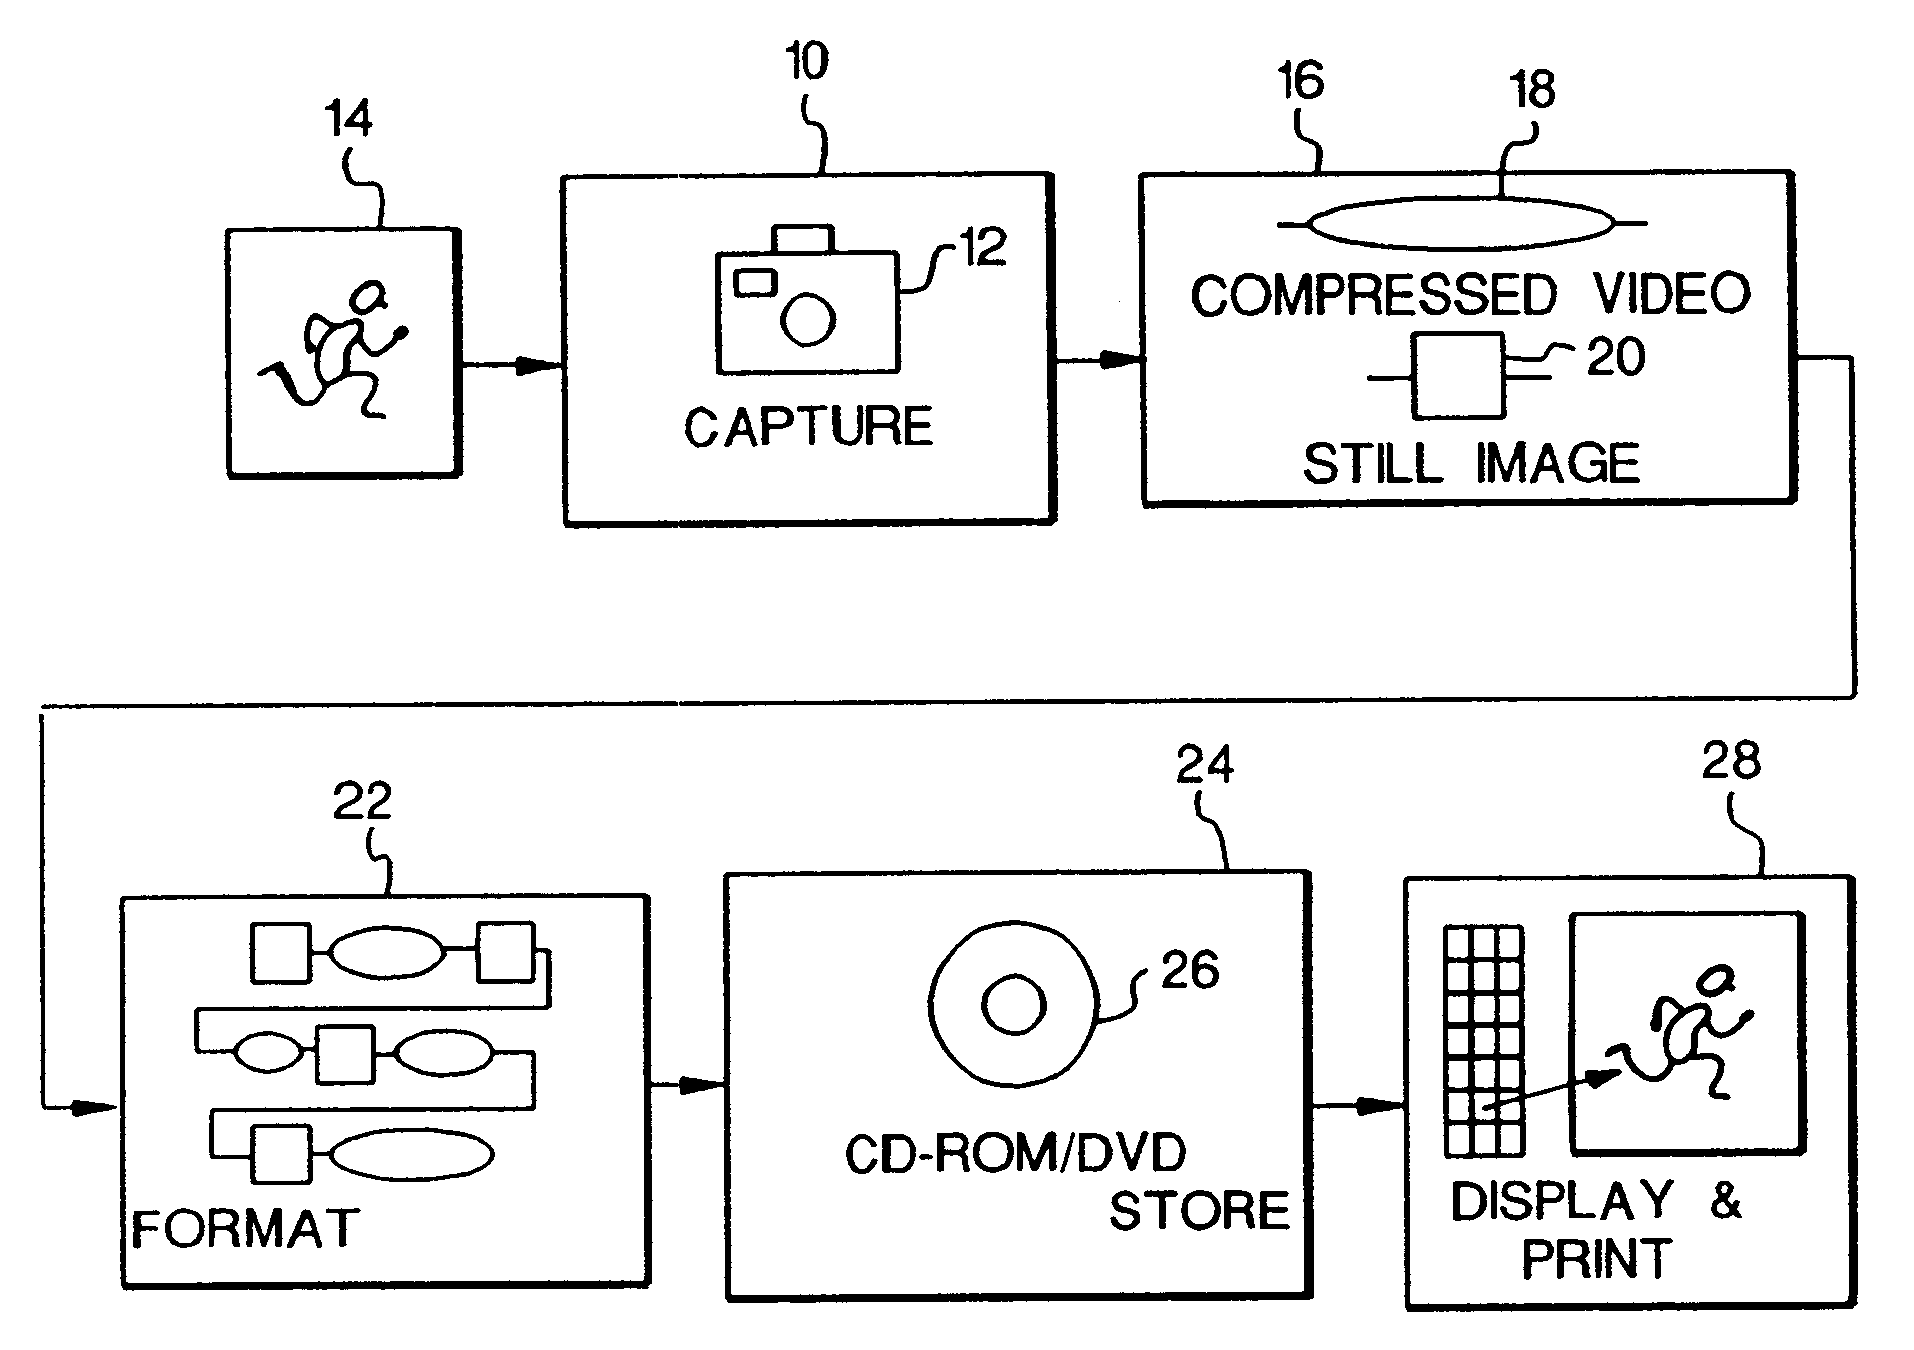 Digital camera for capturing a sequence of full and reduced resolution digital images and storing motion and still digital image data